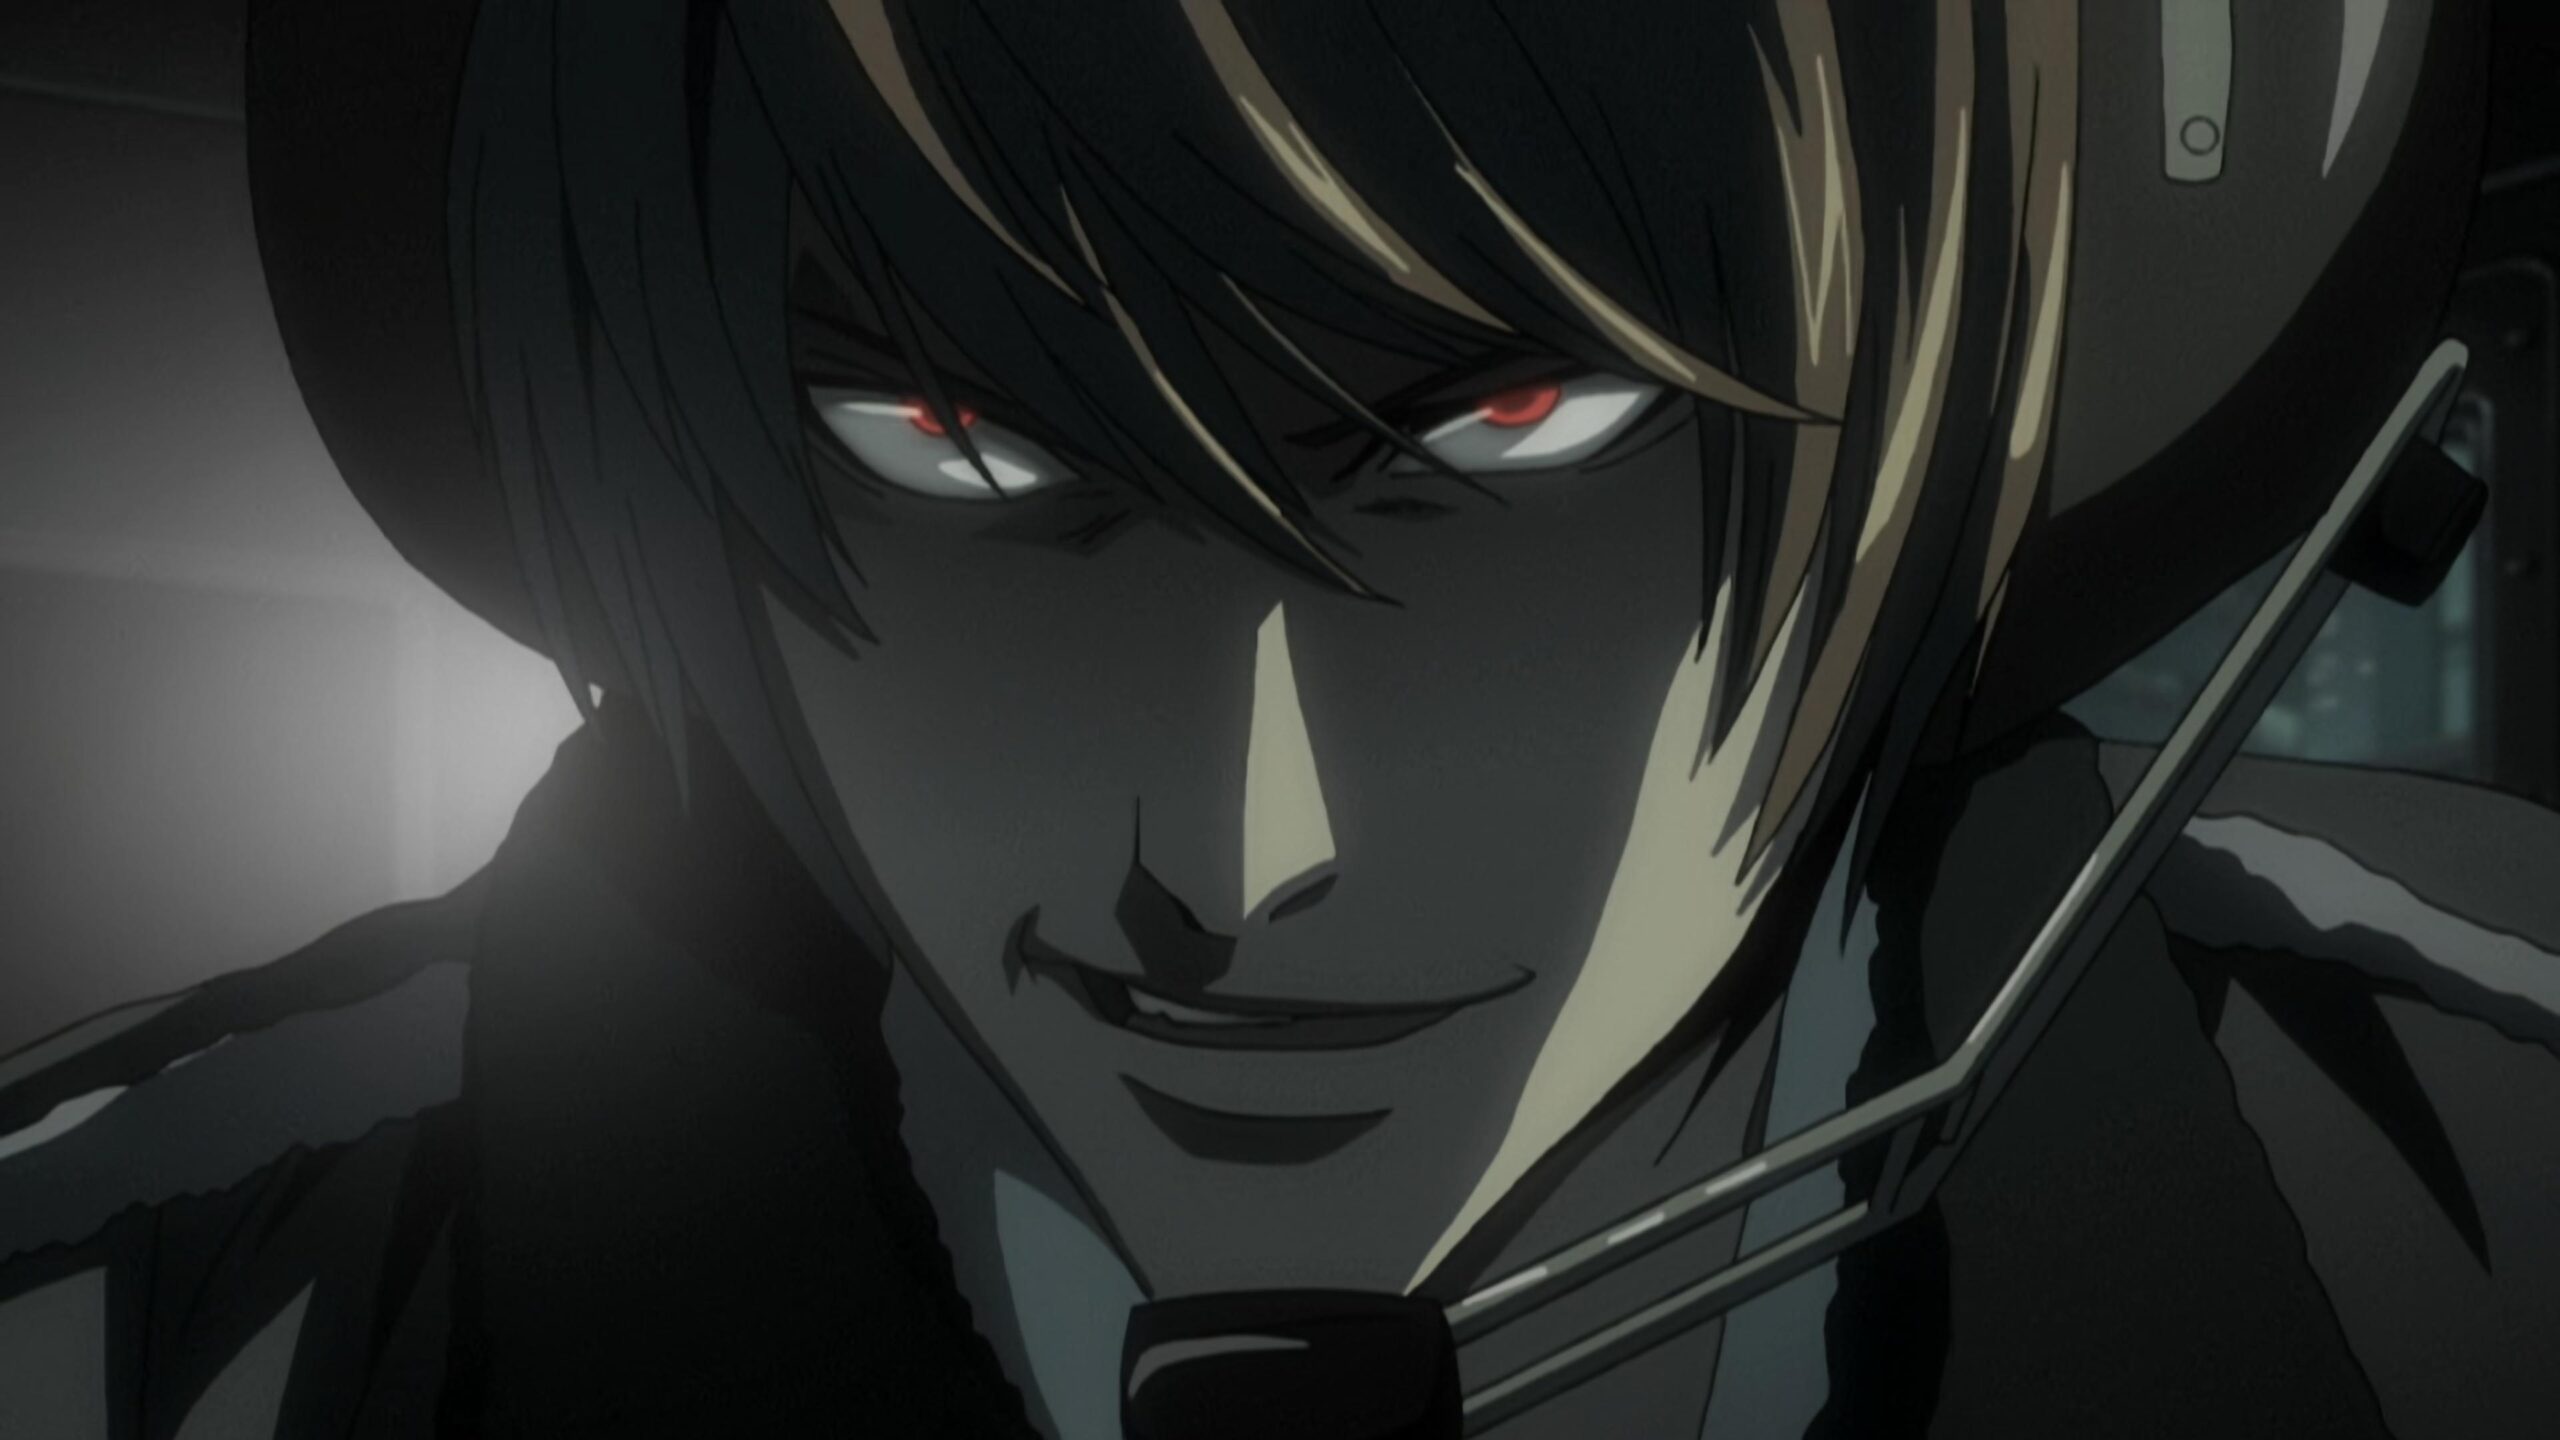 Man speaks through headset. Episode 24: "Revival." Death Note. Madhouse. 2006-2007. 